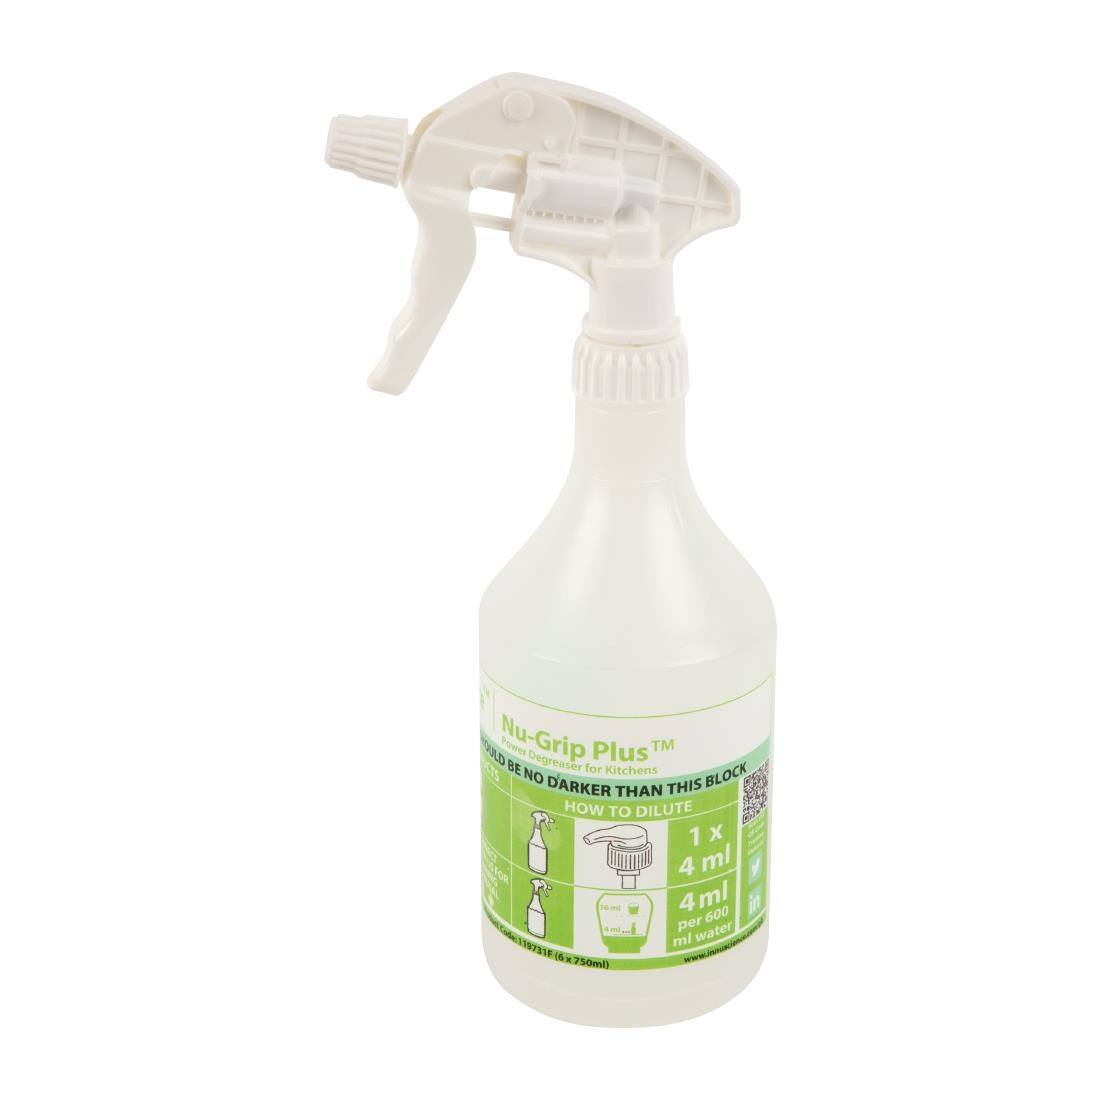 InnuScience Nu-Grip Plus Kitchen Degreaser and Floor Cleaner Refill Bottles 750ml (6 Pack)